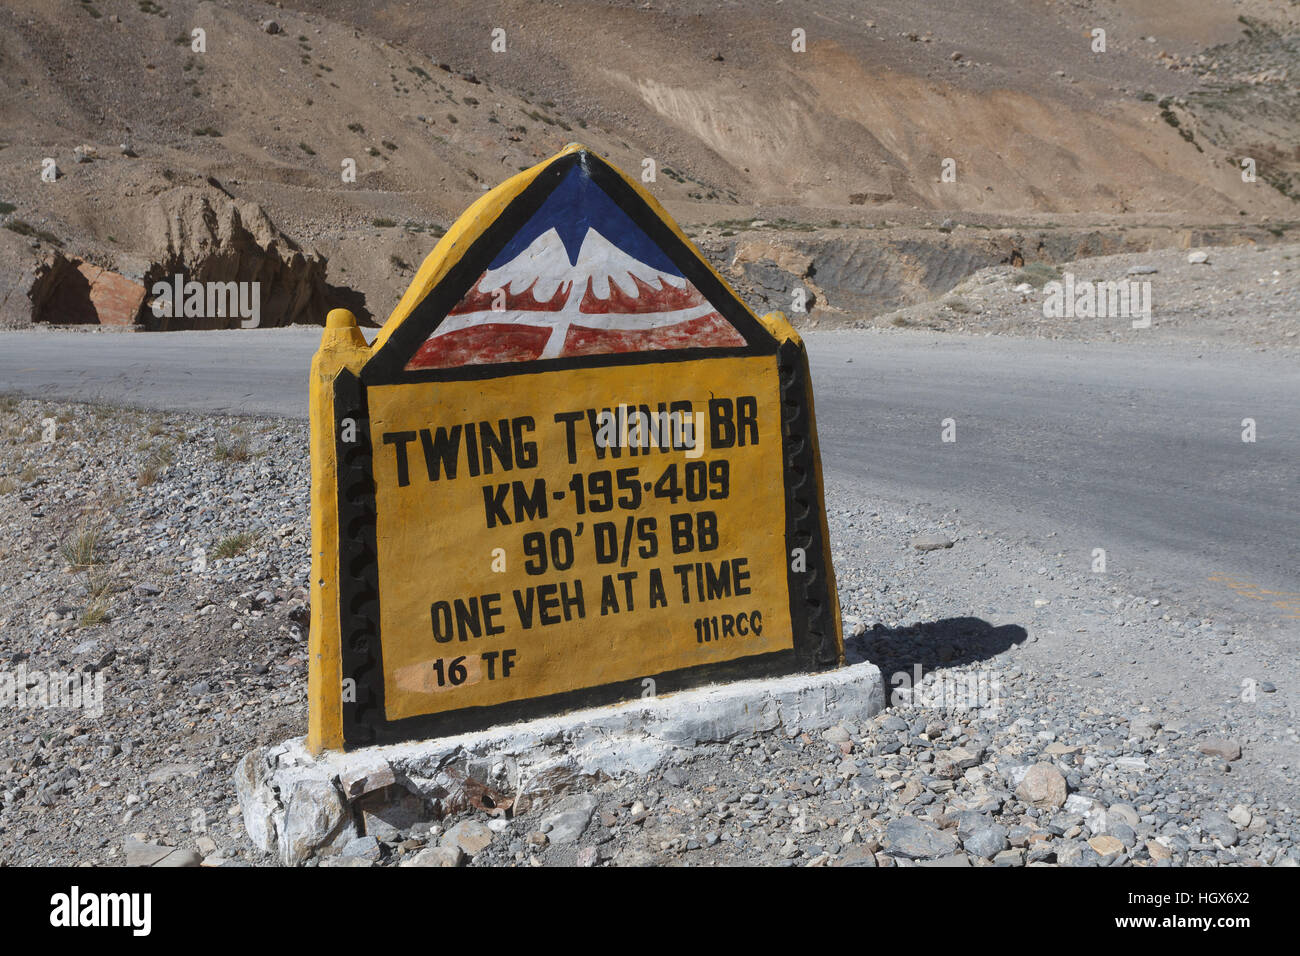 Road sign on the Manali - Leh highway, India Stock Photo